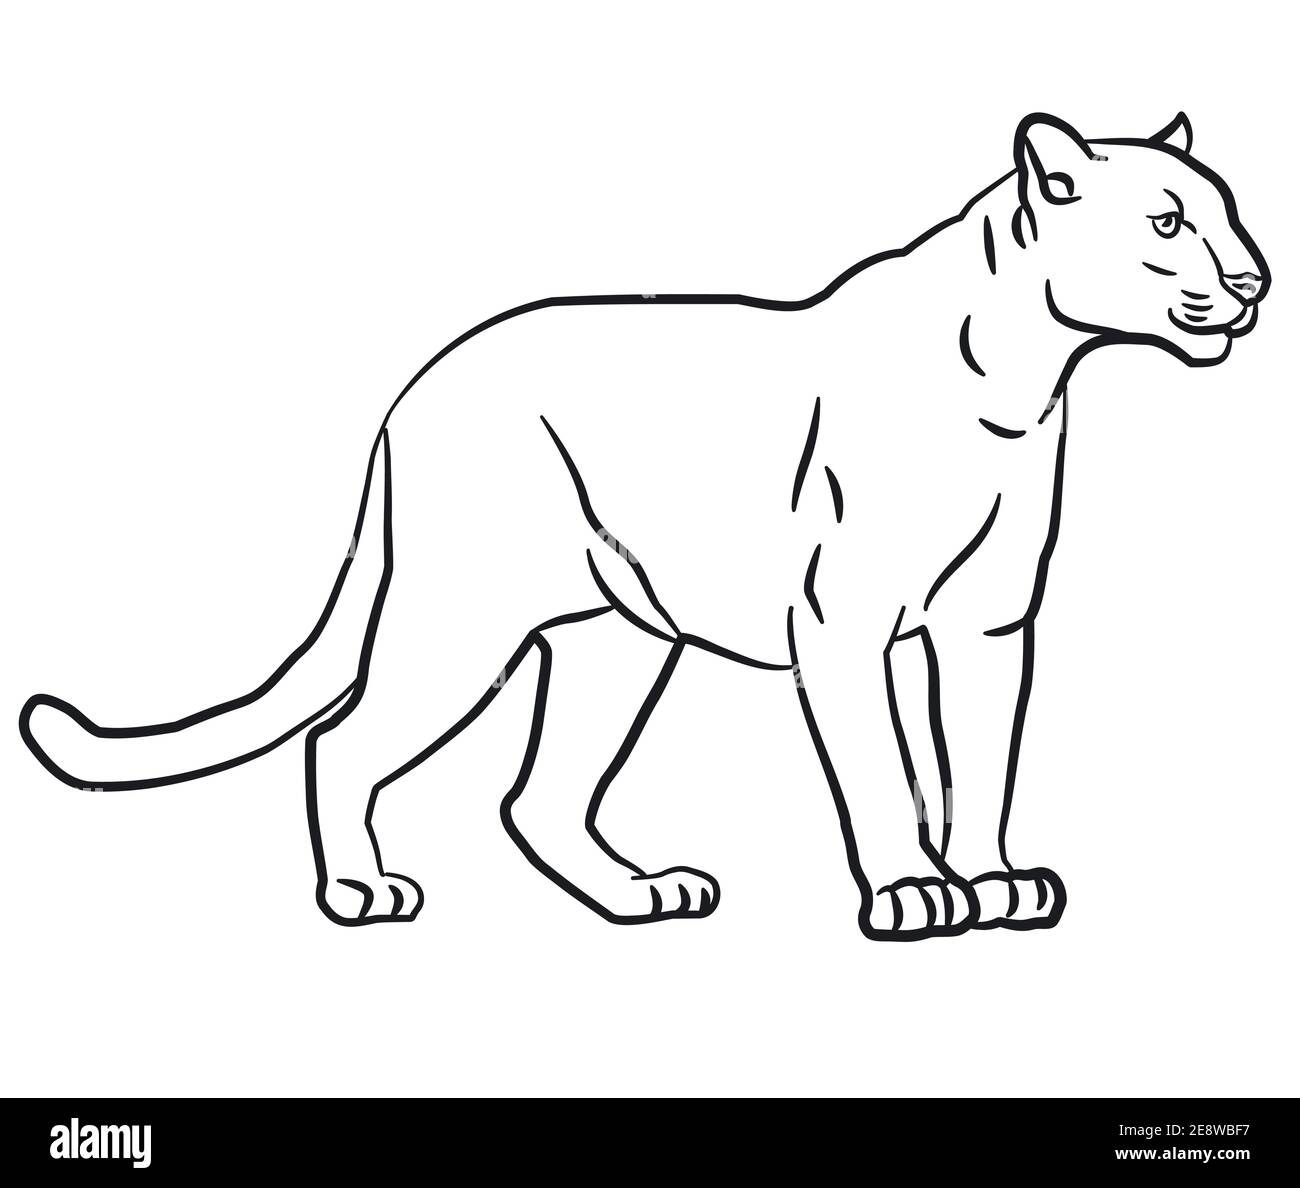 Puma drawing Stock Vector Images - Alamy